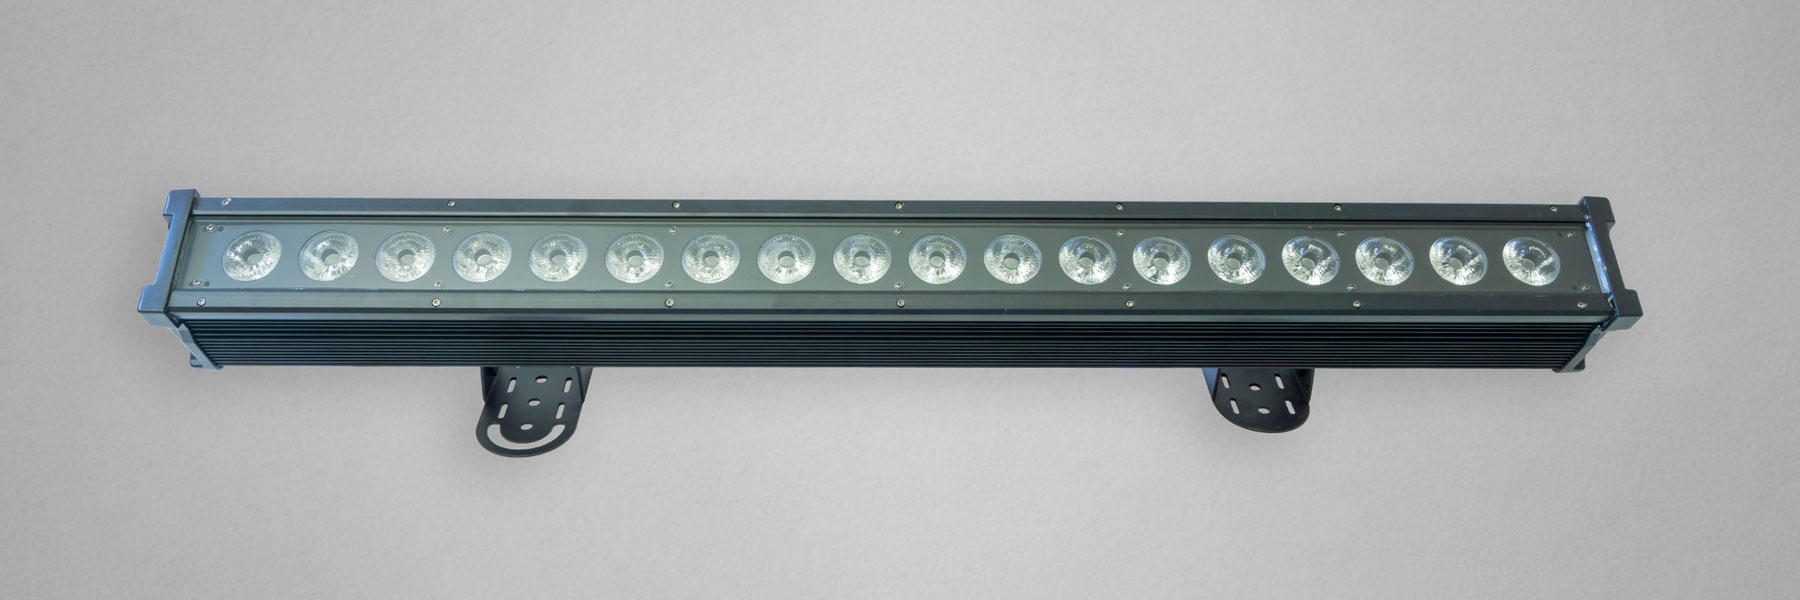 Pollens LED Wall Washer